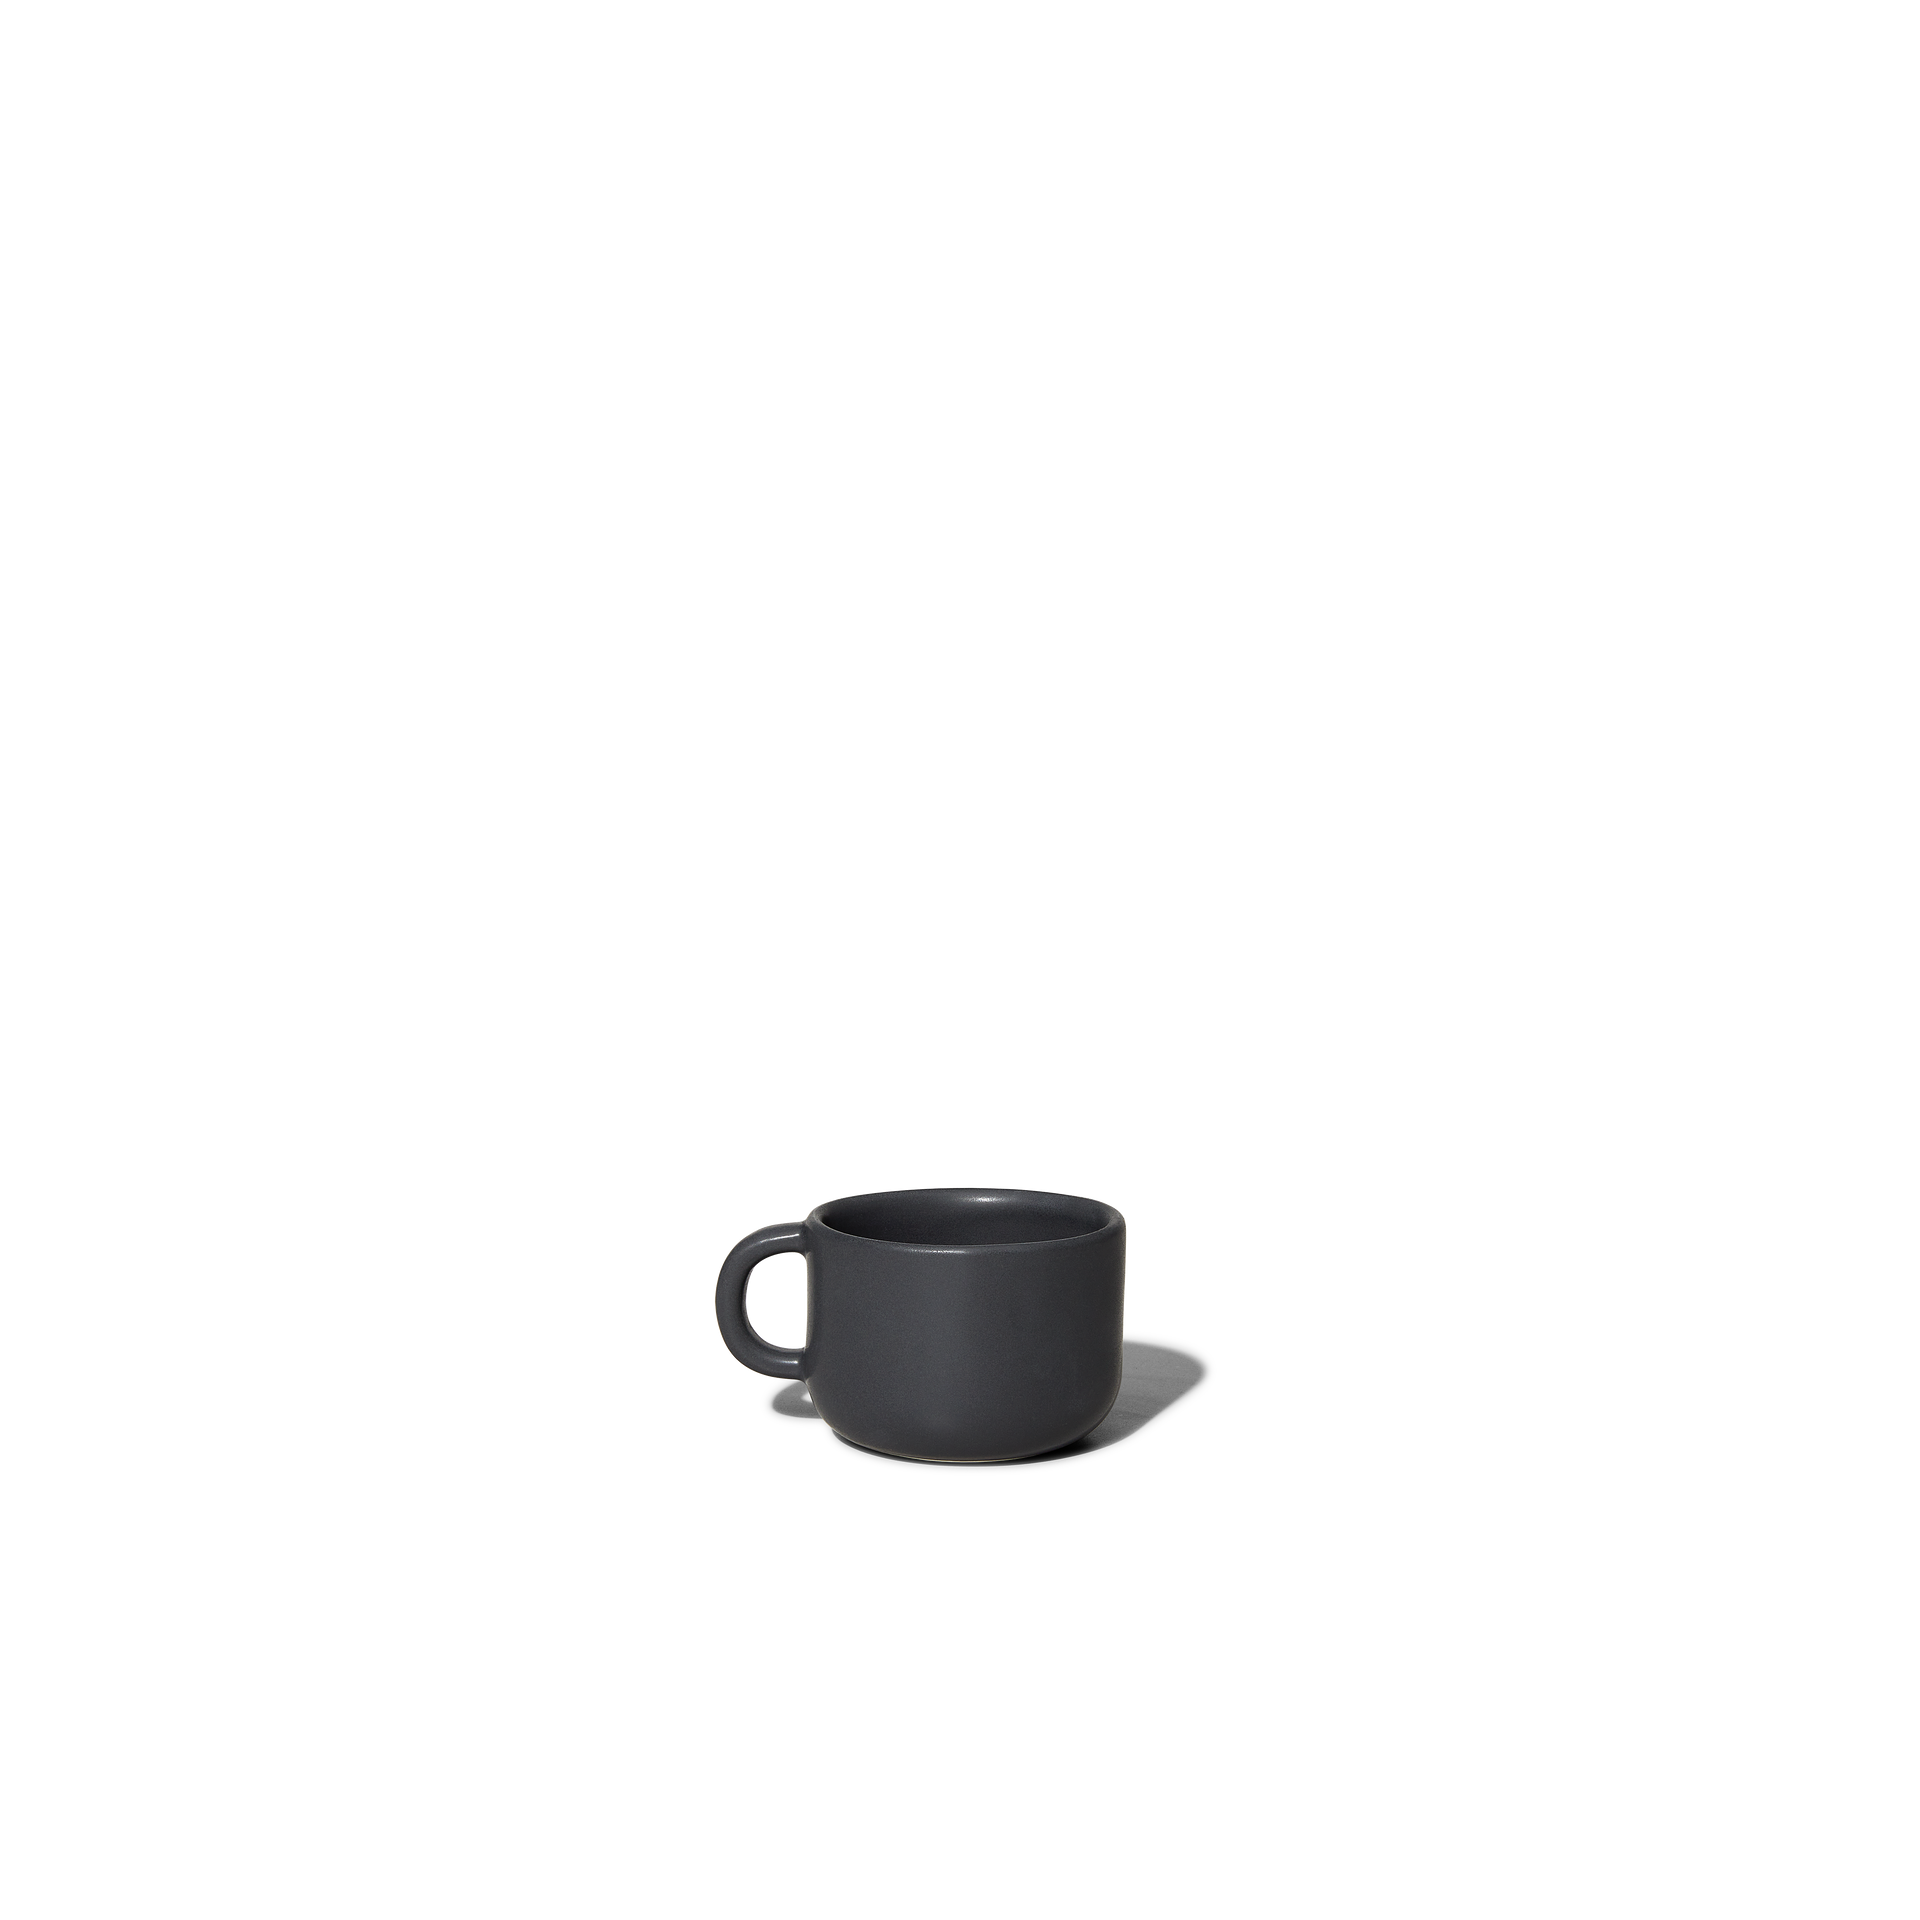 Cappuccino Cup